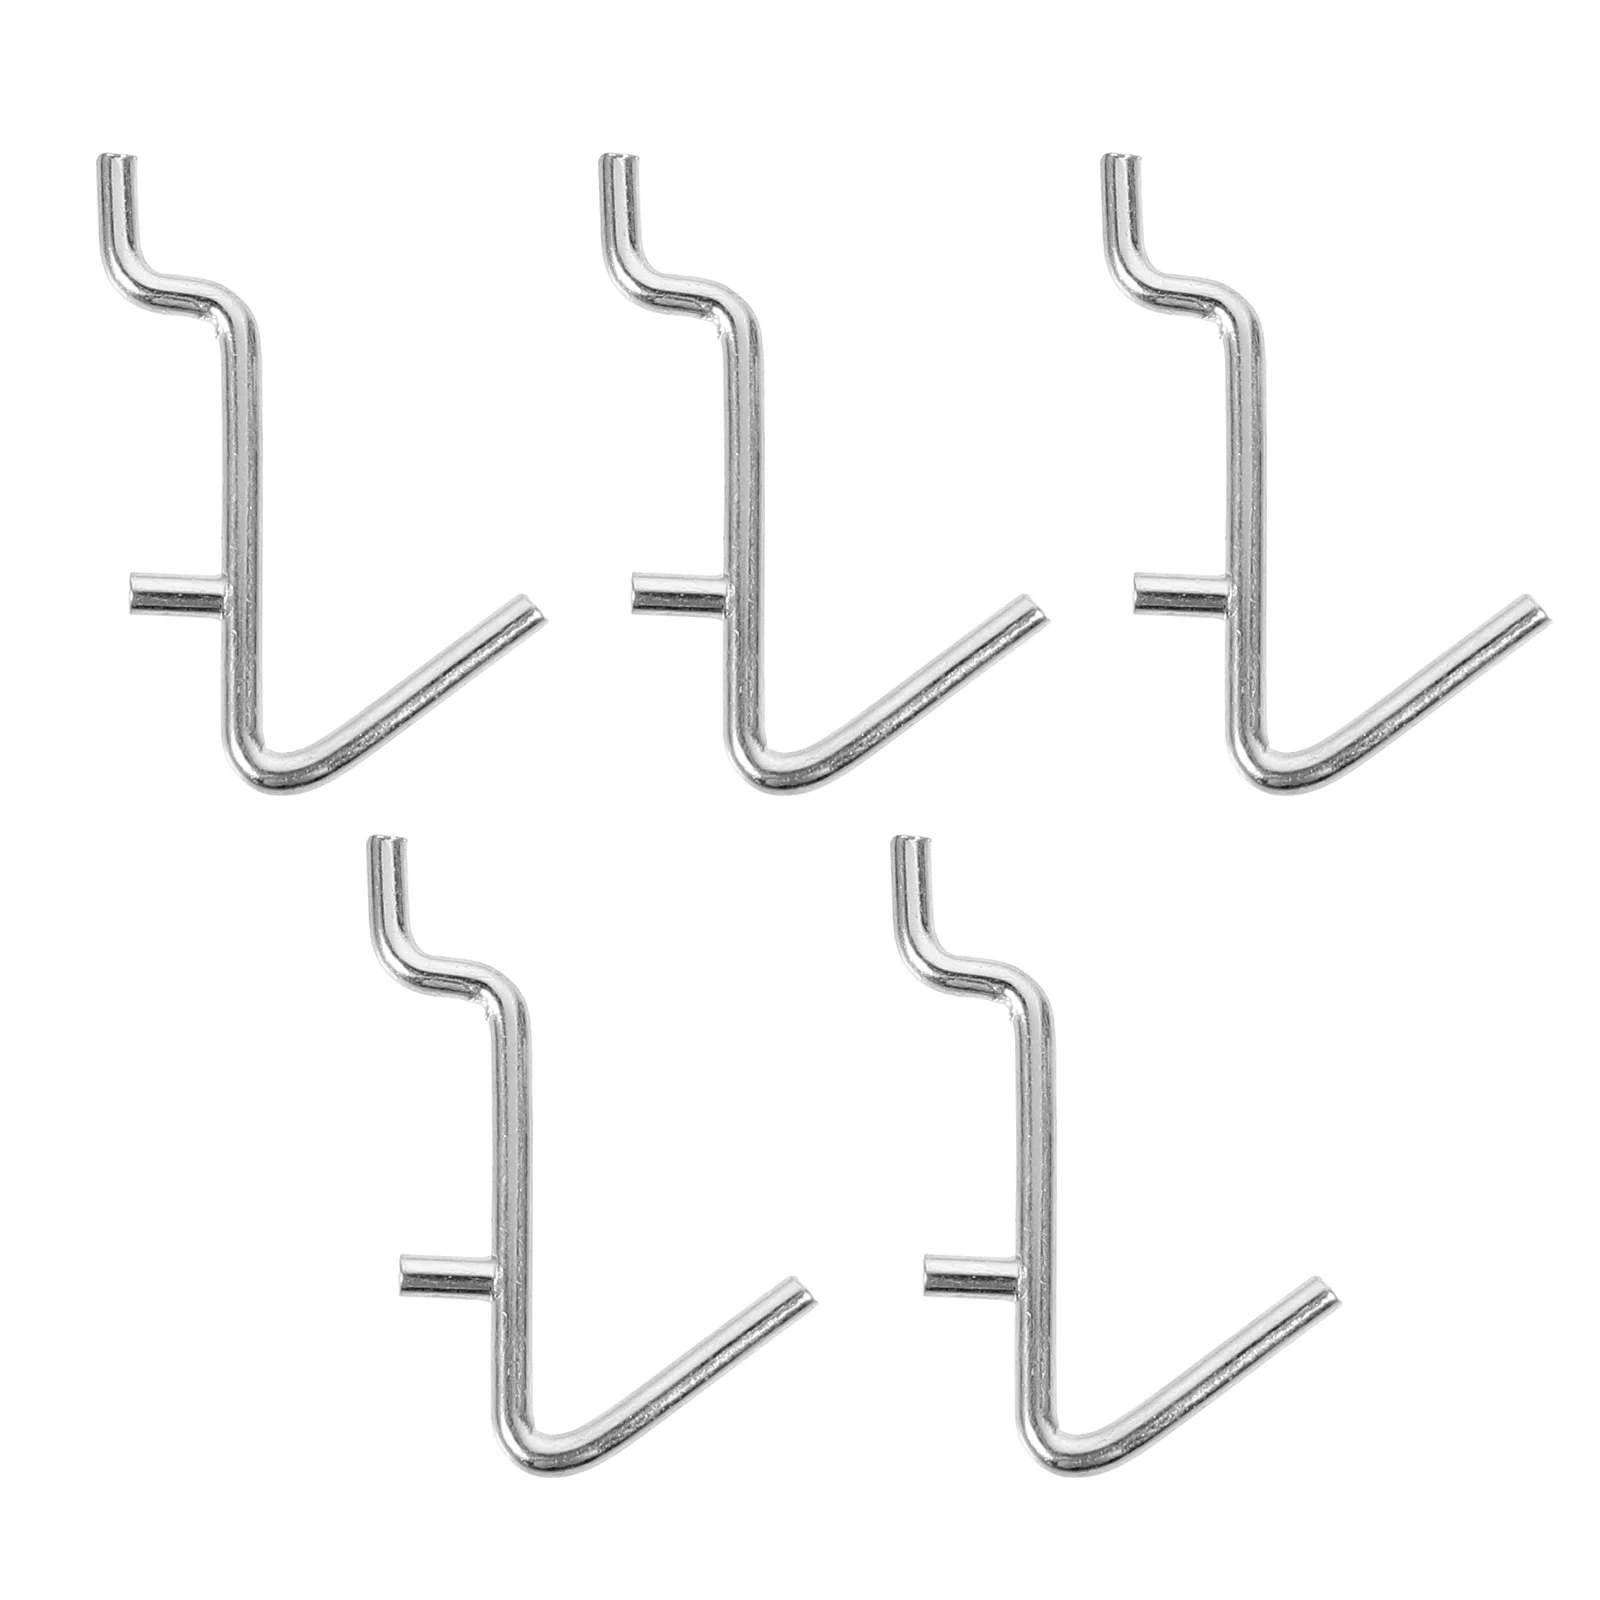 

5 Pcs Perforated V-hook Display Shelf Pegboard Heavy Duty Accessories Hangers Wall Stainless Steel Pegs Shape Metal